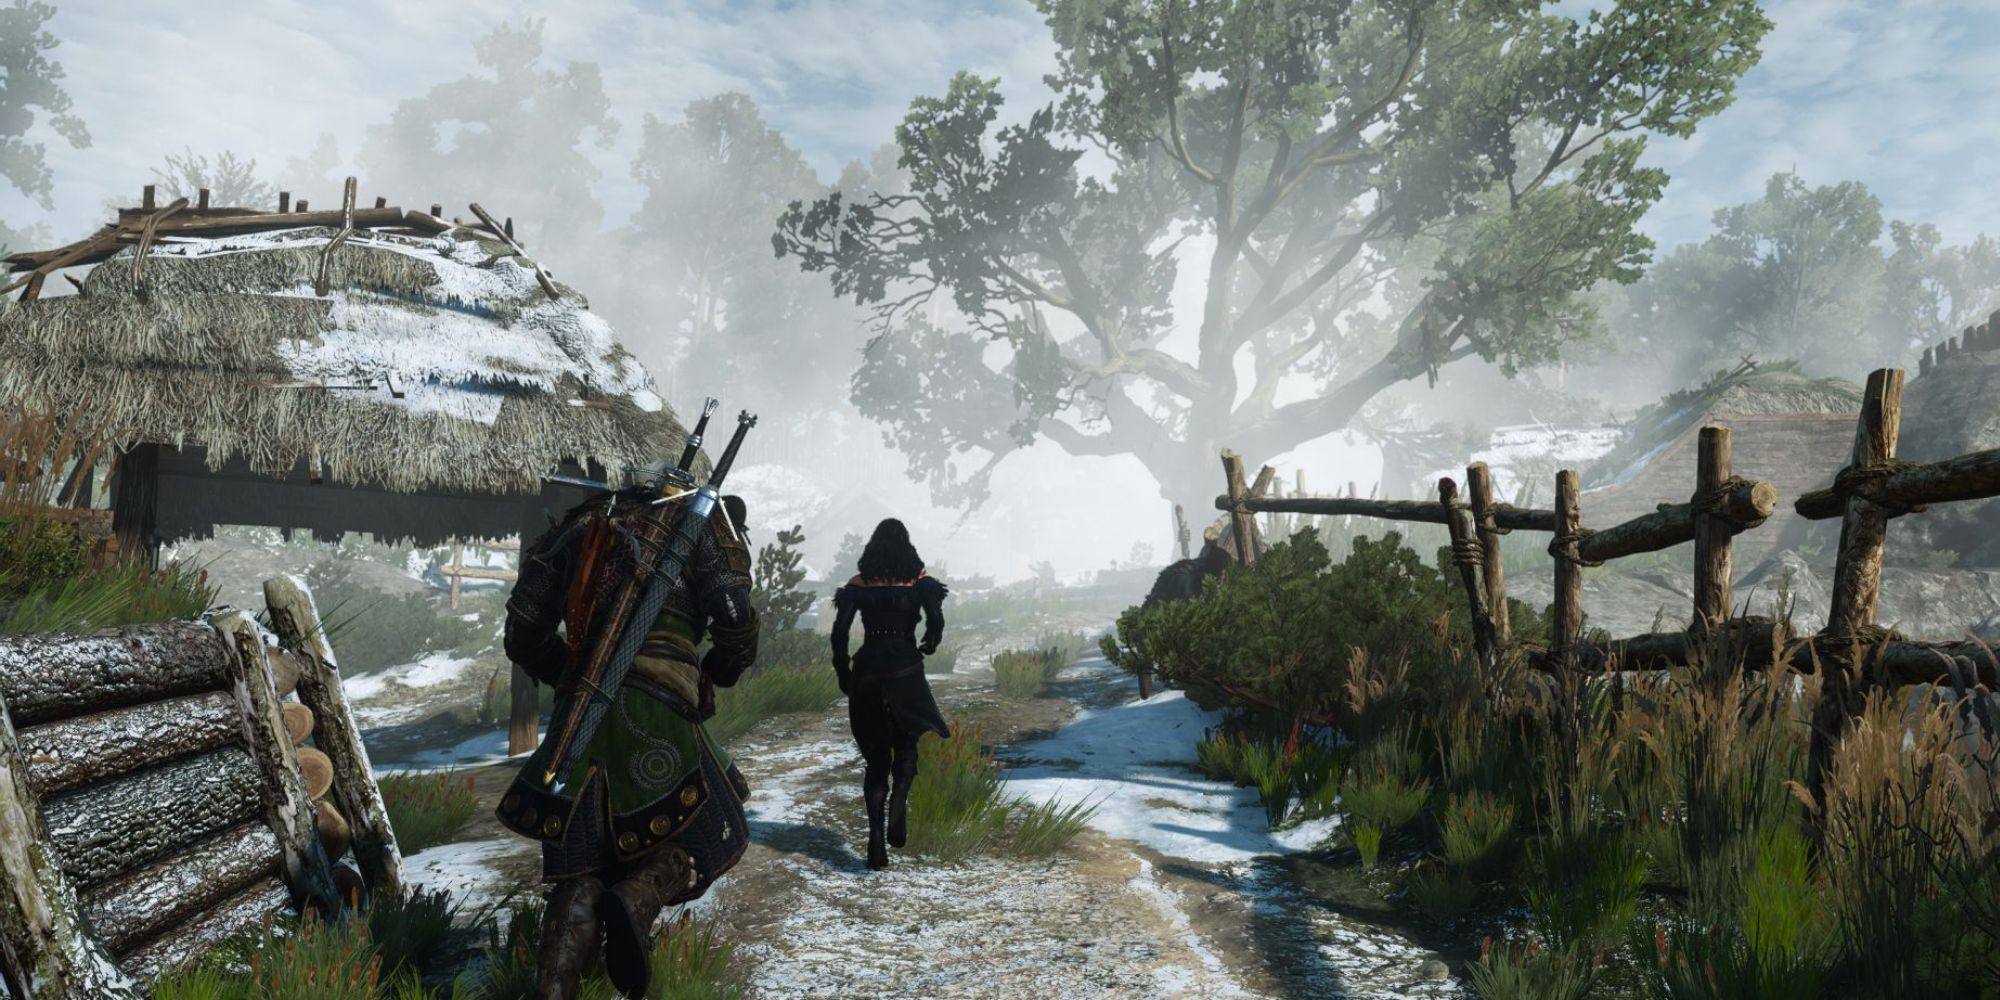 Geralt and Yennefer run into a frost-covered village in Skellige, with a large, imposing tree in the background